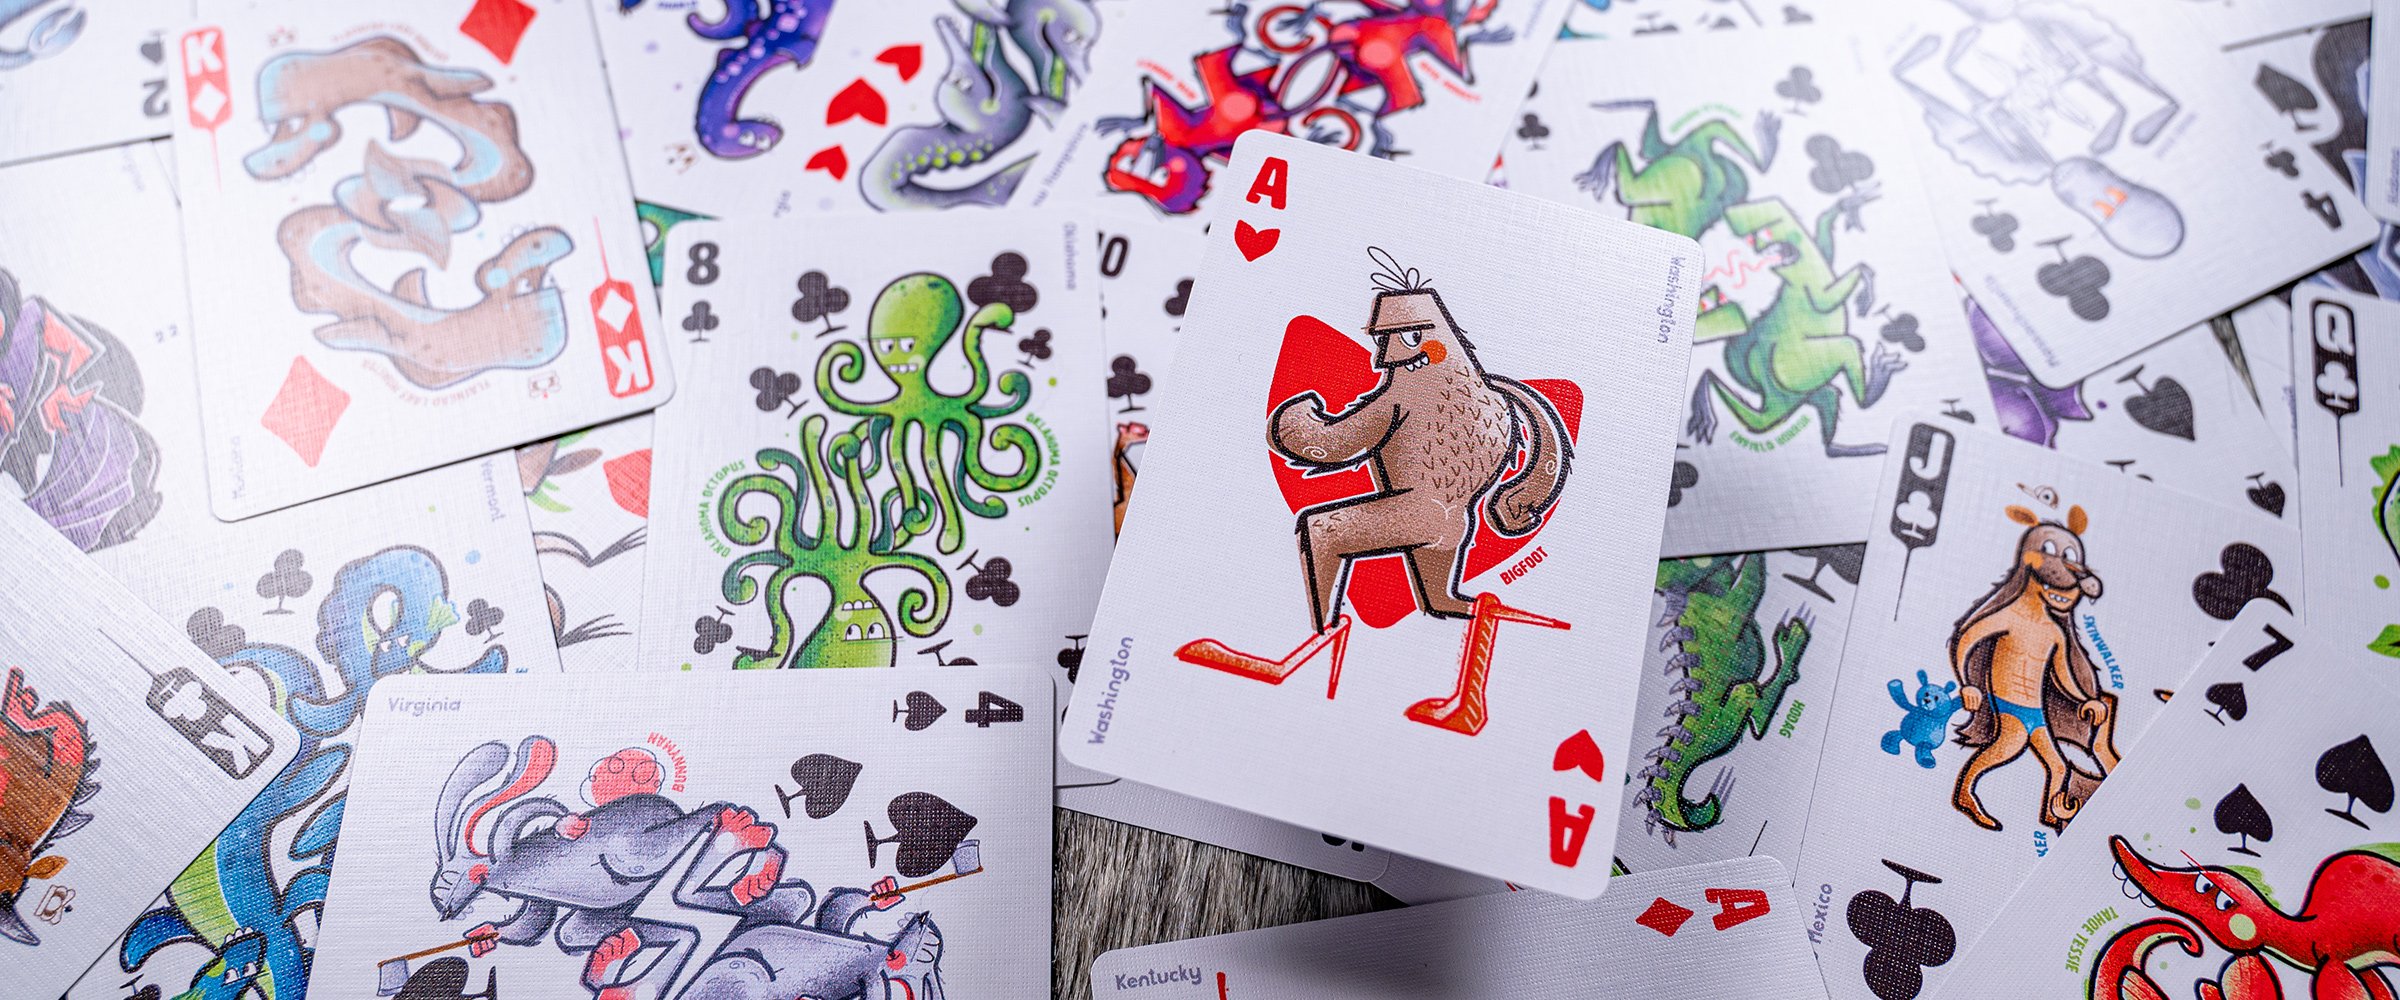 Waterproof Paper: Printing Your Own Playing Cards & Custom Projects